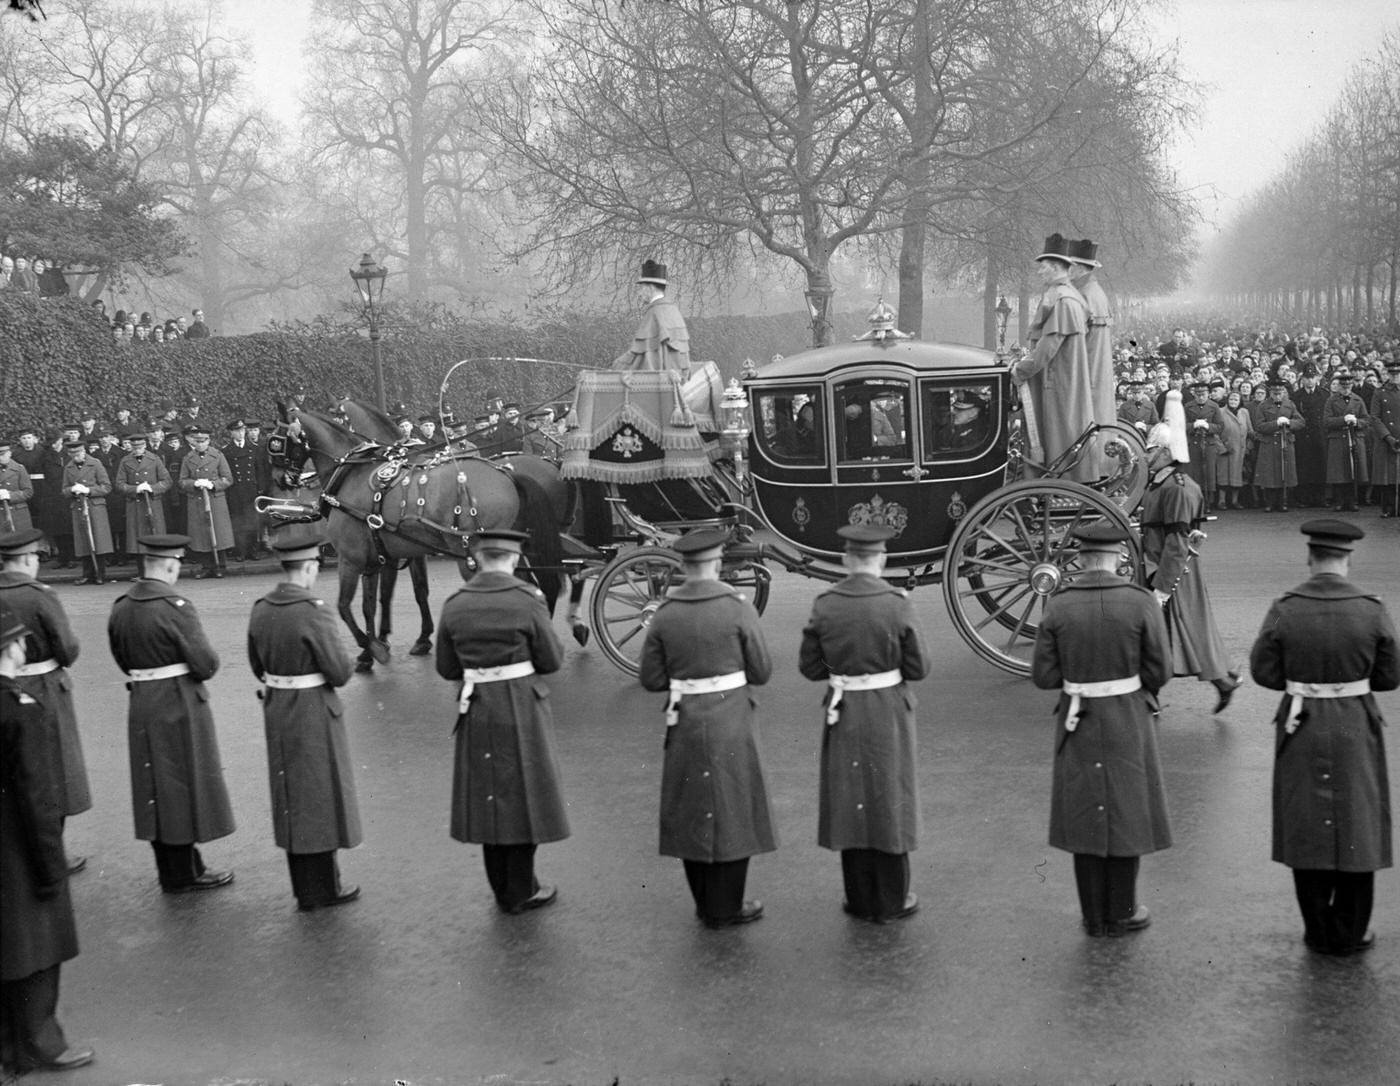 The carriage carrying Haakon VII, King of Norway, Queen Juliana of the Netherlands, the Duchess of Gloucester and the Duchess of Kent in the funeral procession of King George VI in the Mall.